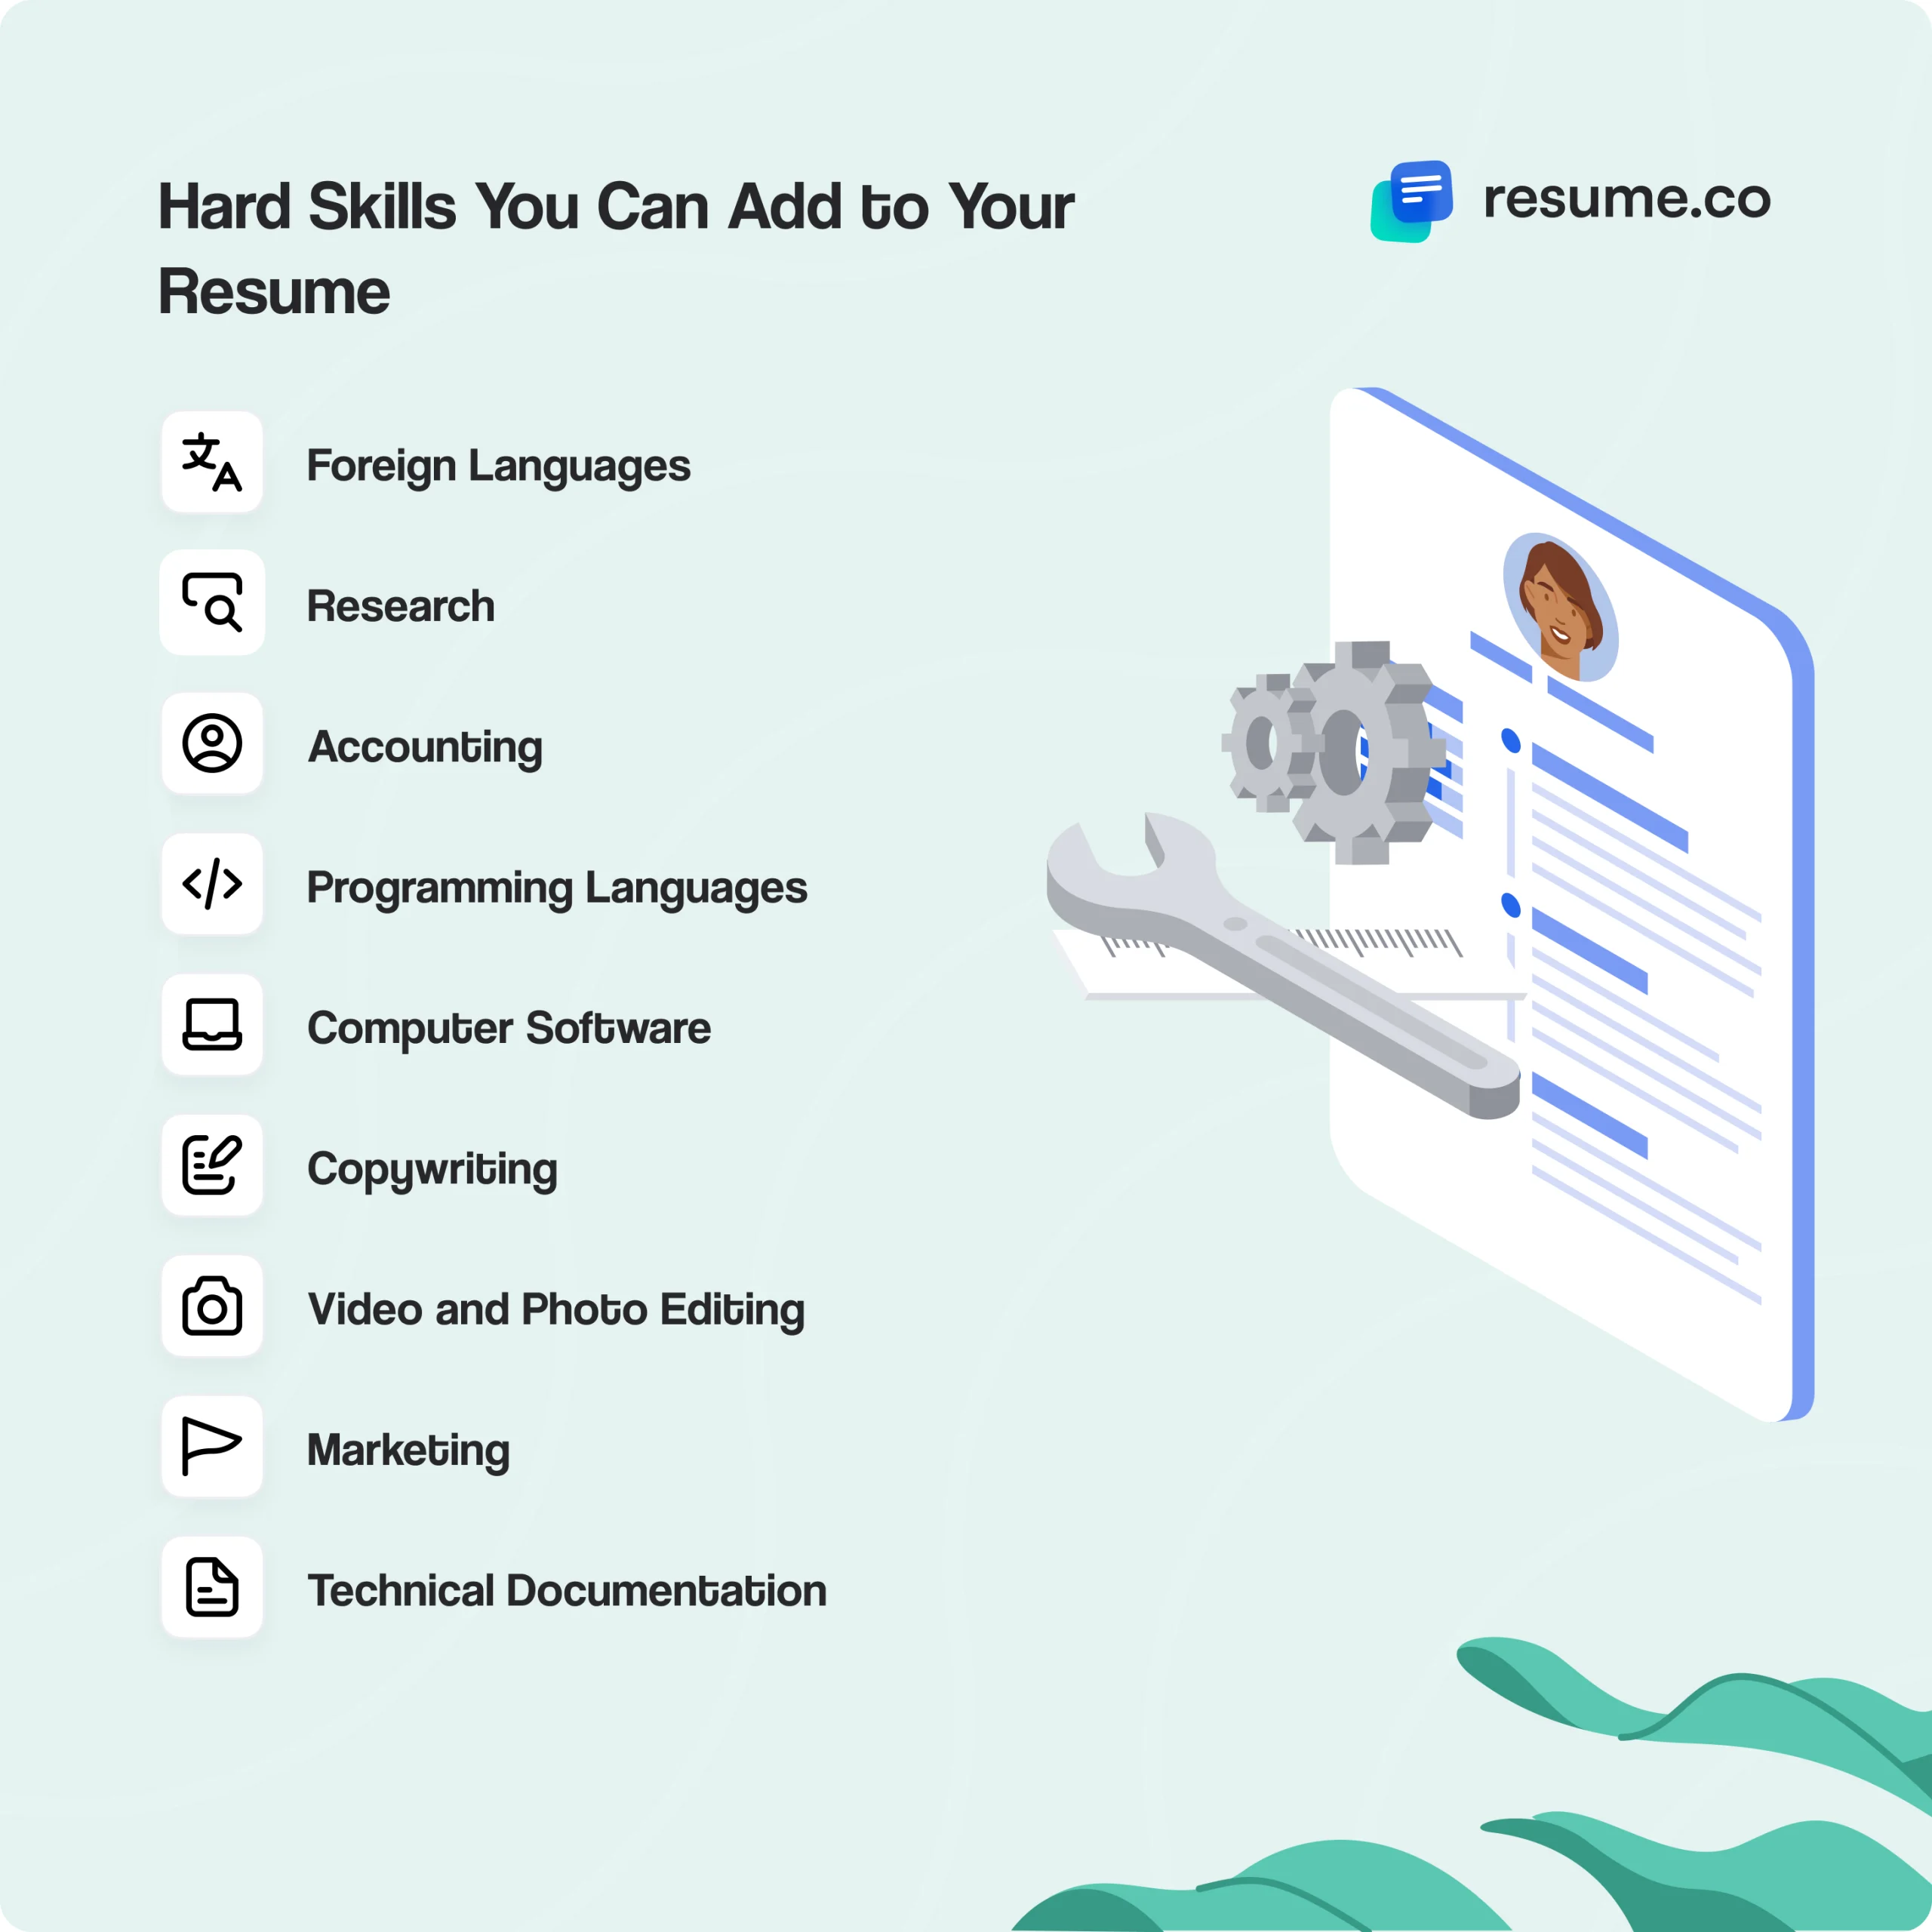 Hard Skills to Add to Your Resume